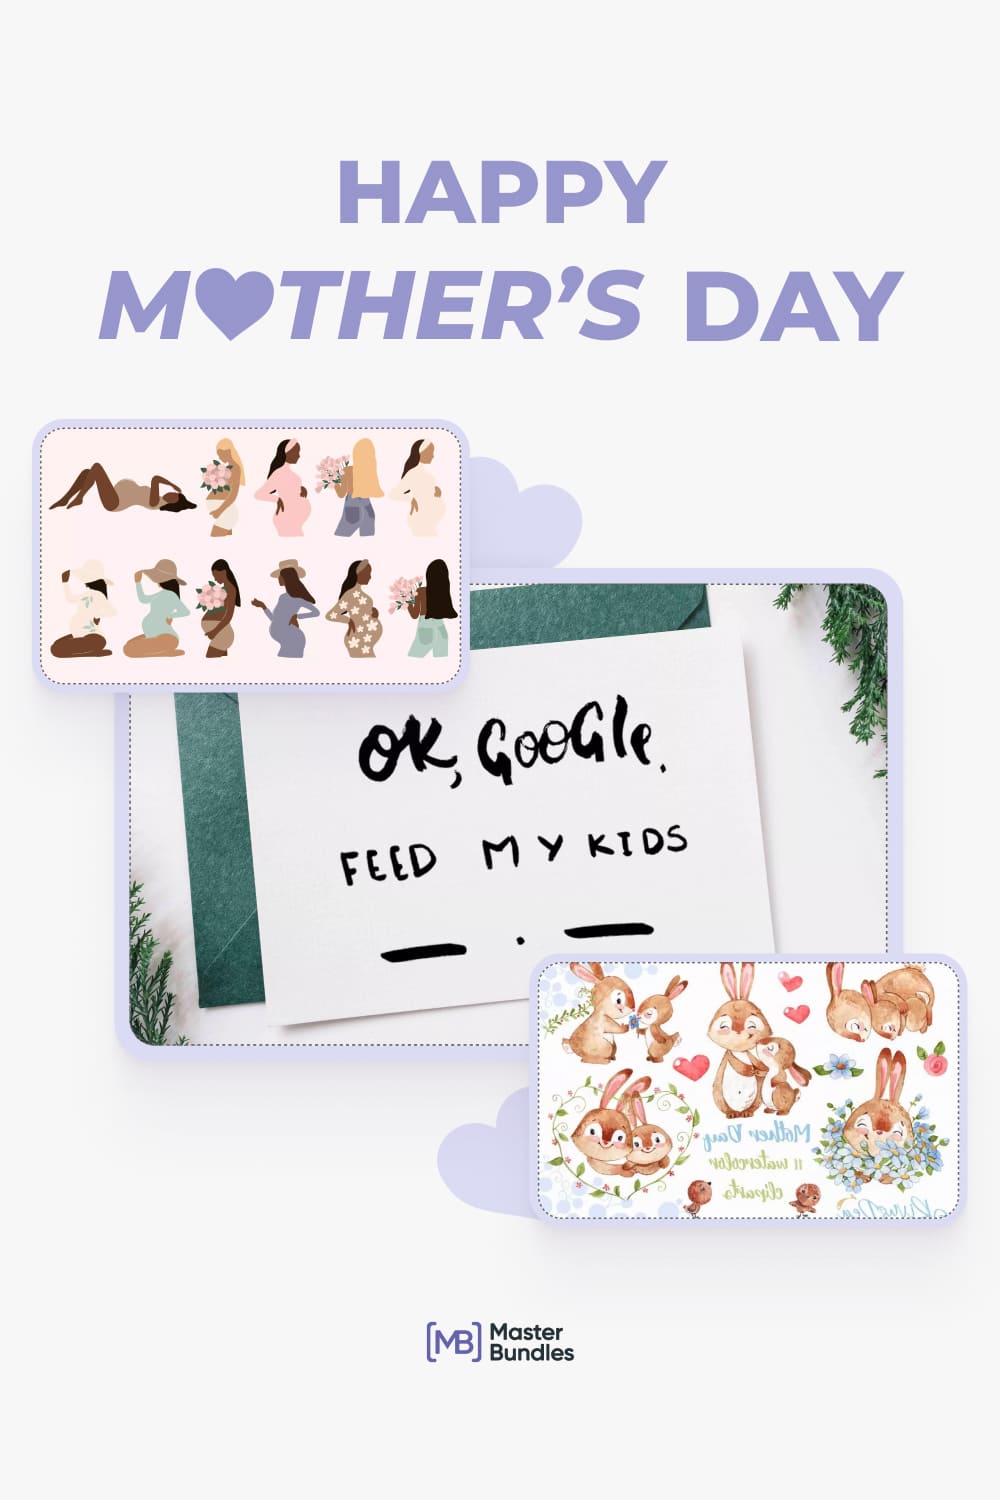 A mother's day card with a picture of a mother's day card.